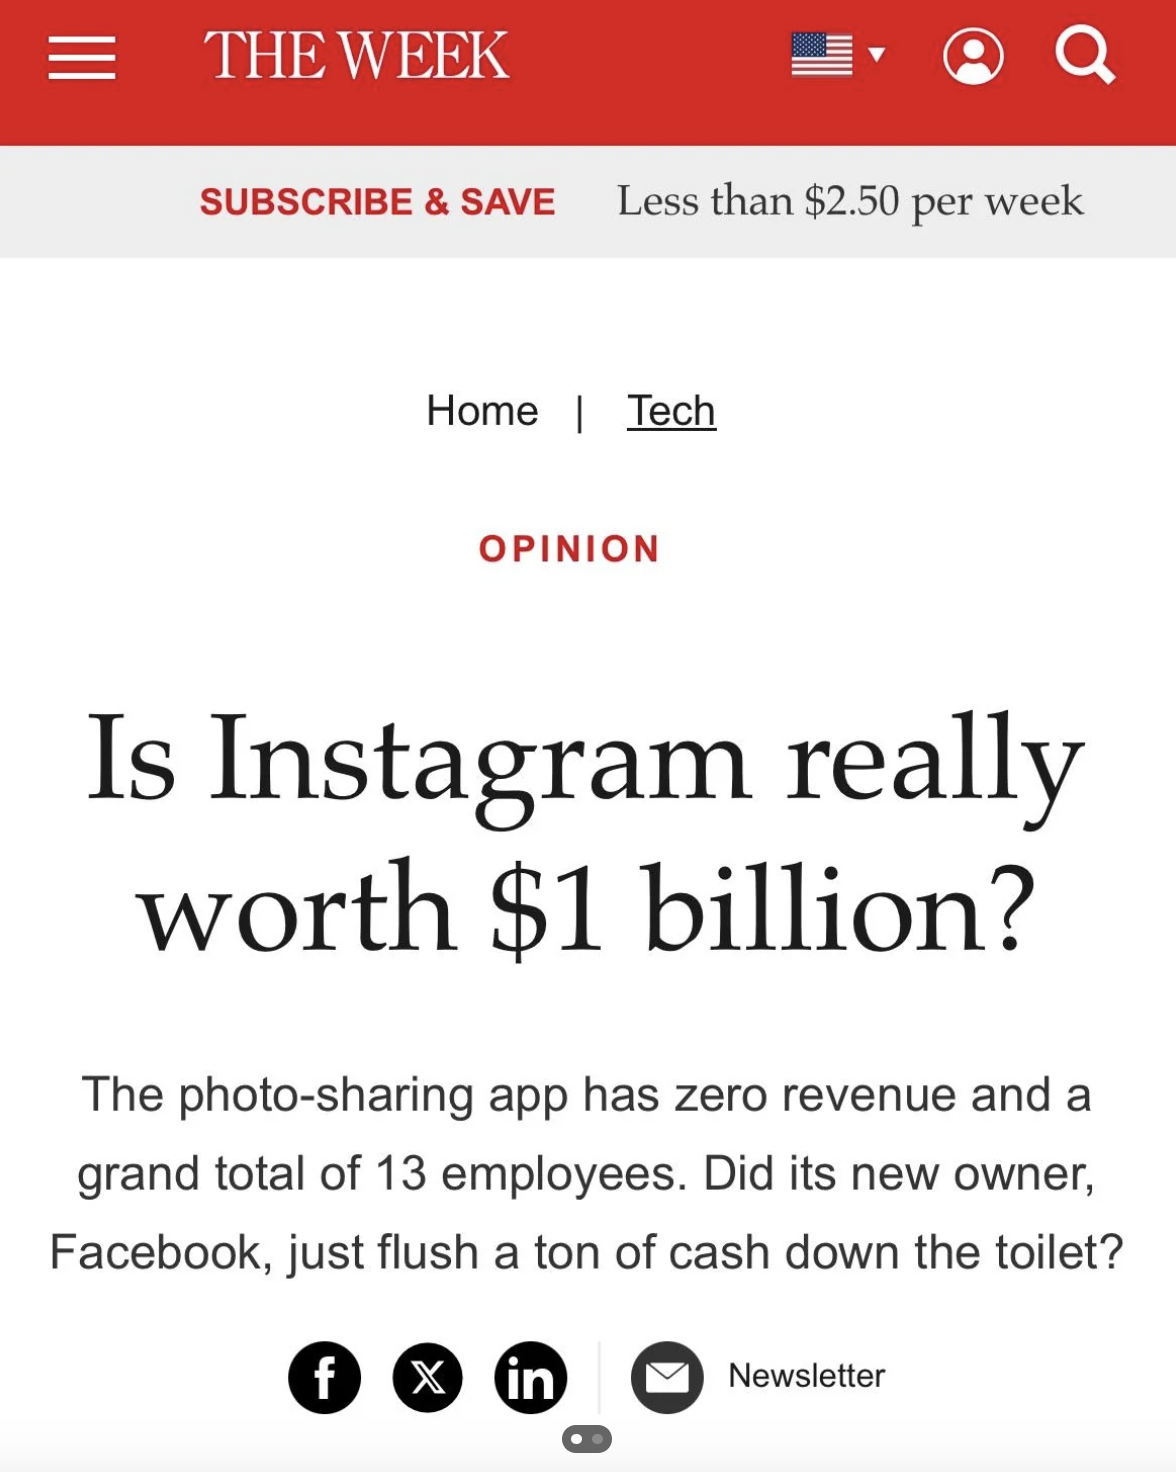 screenshot - 1 The Week Subscribe & Save Less than $2.50 per week Home | Tech Opinion Is Instagram really worth $1 billion? The photosharing app has zero revenue and a grand total of 13 employees. Did its new owner, Facebook, just flush a ton of cash down